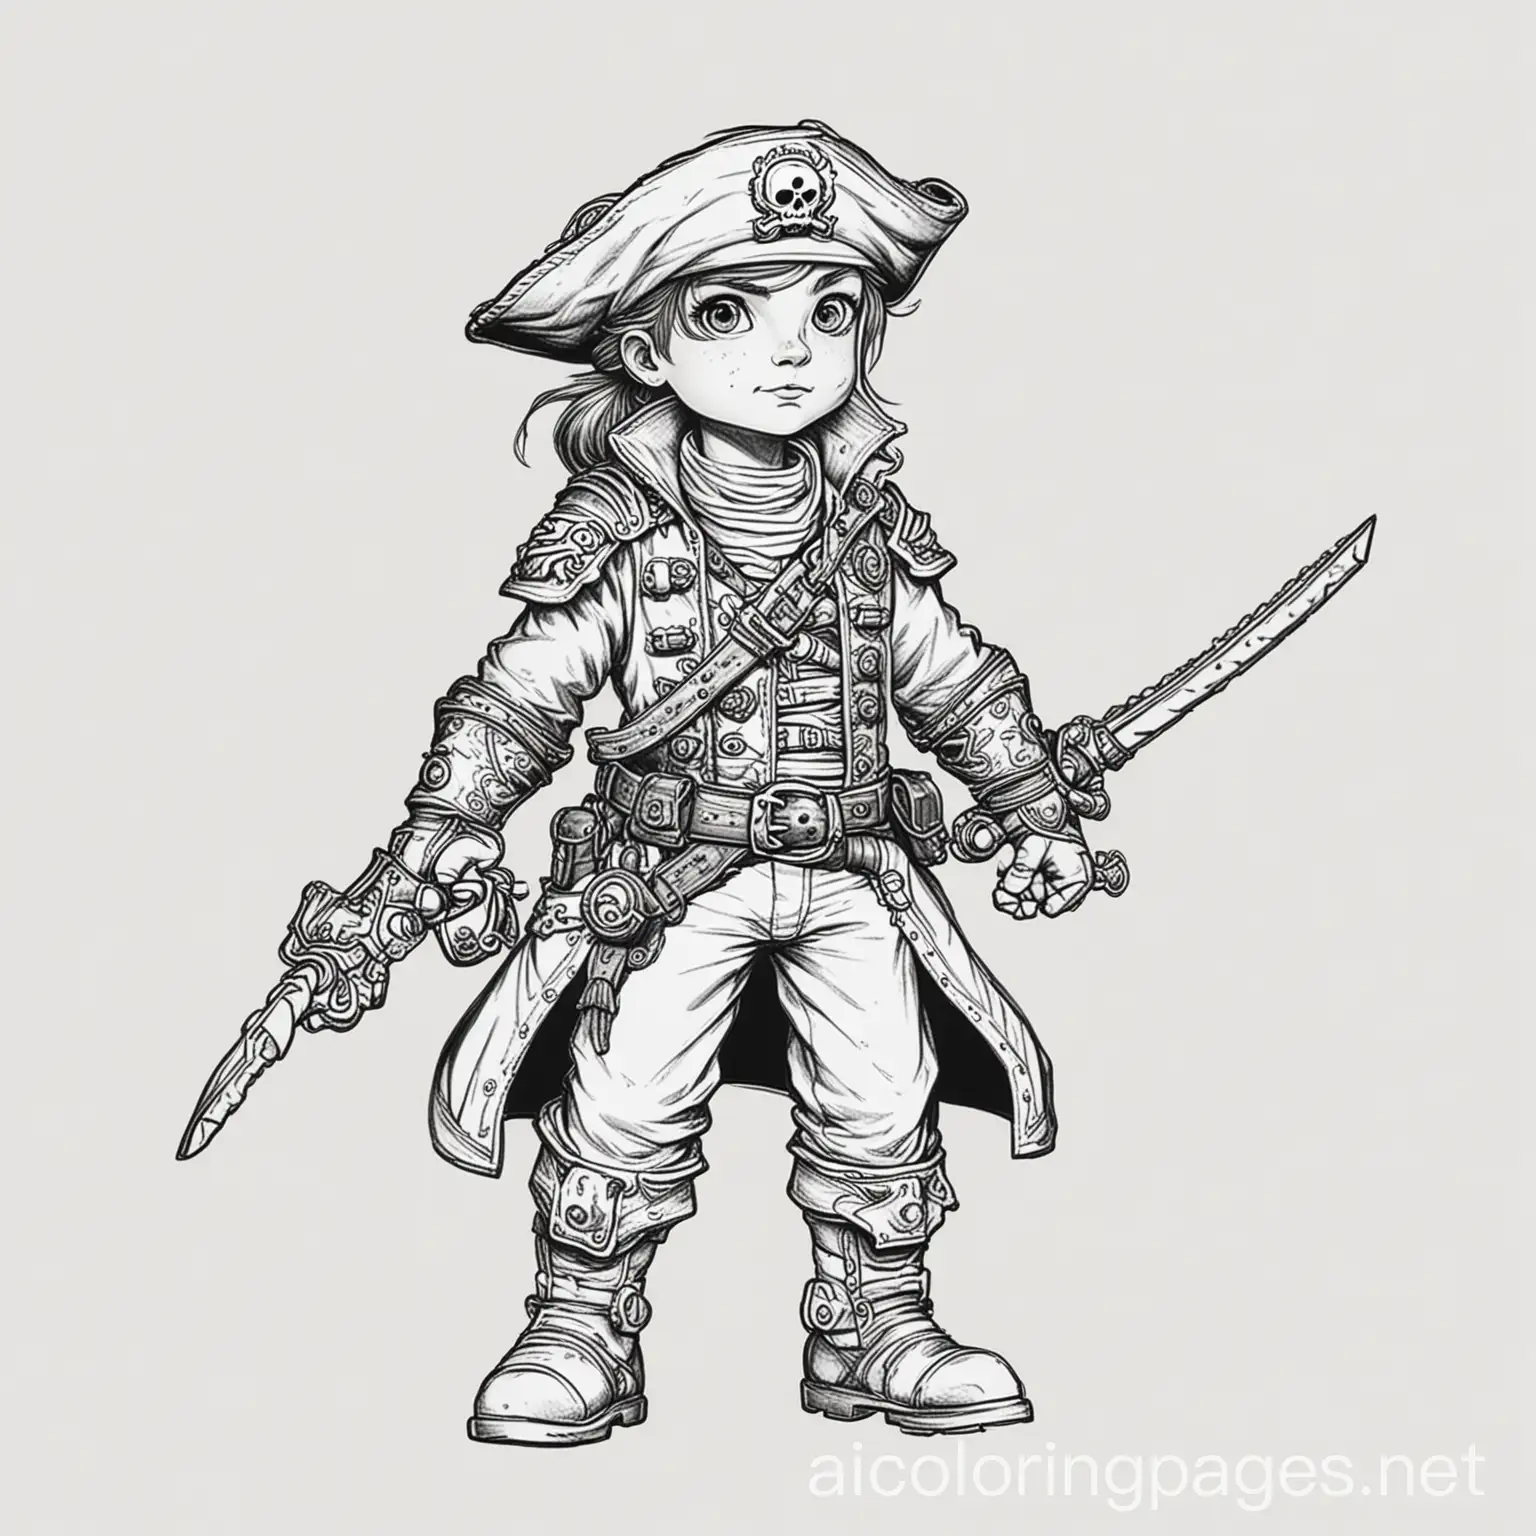 space pirate, Coloring Page, black and white, line art, white background, Simplicity, Ample White Space. The background of the coloring page is plain white to make it easy for young children to color within the lines. The outlines of all the subjects are easy to distinguish, making it simple for kids to color without too much difficulty